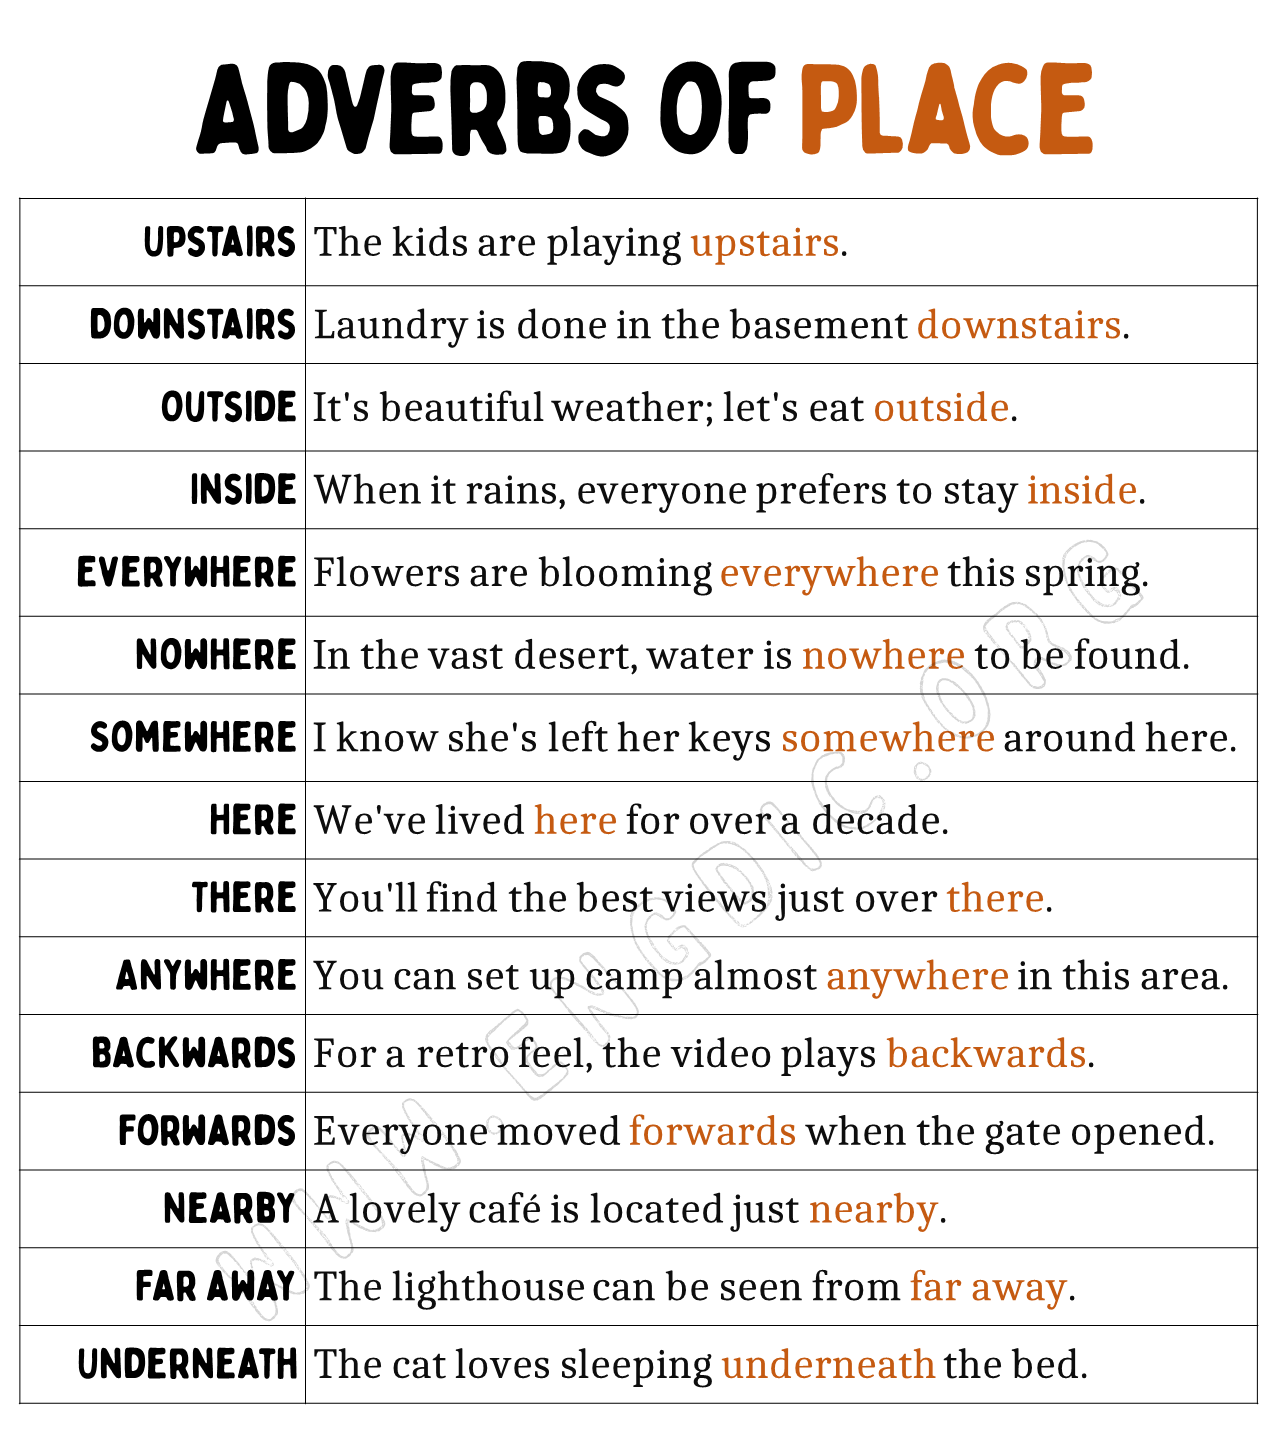 Adverbs of Place